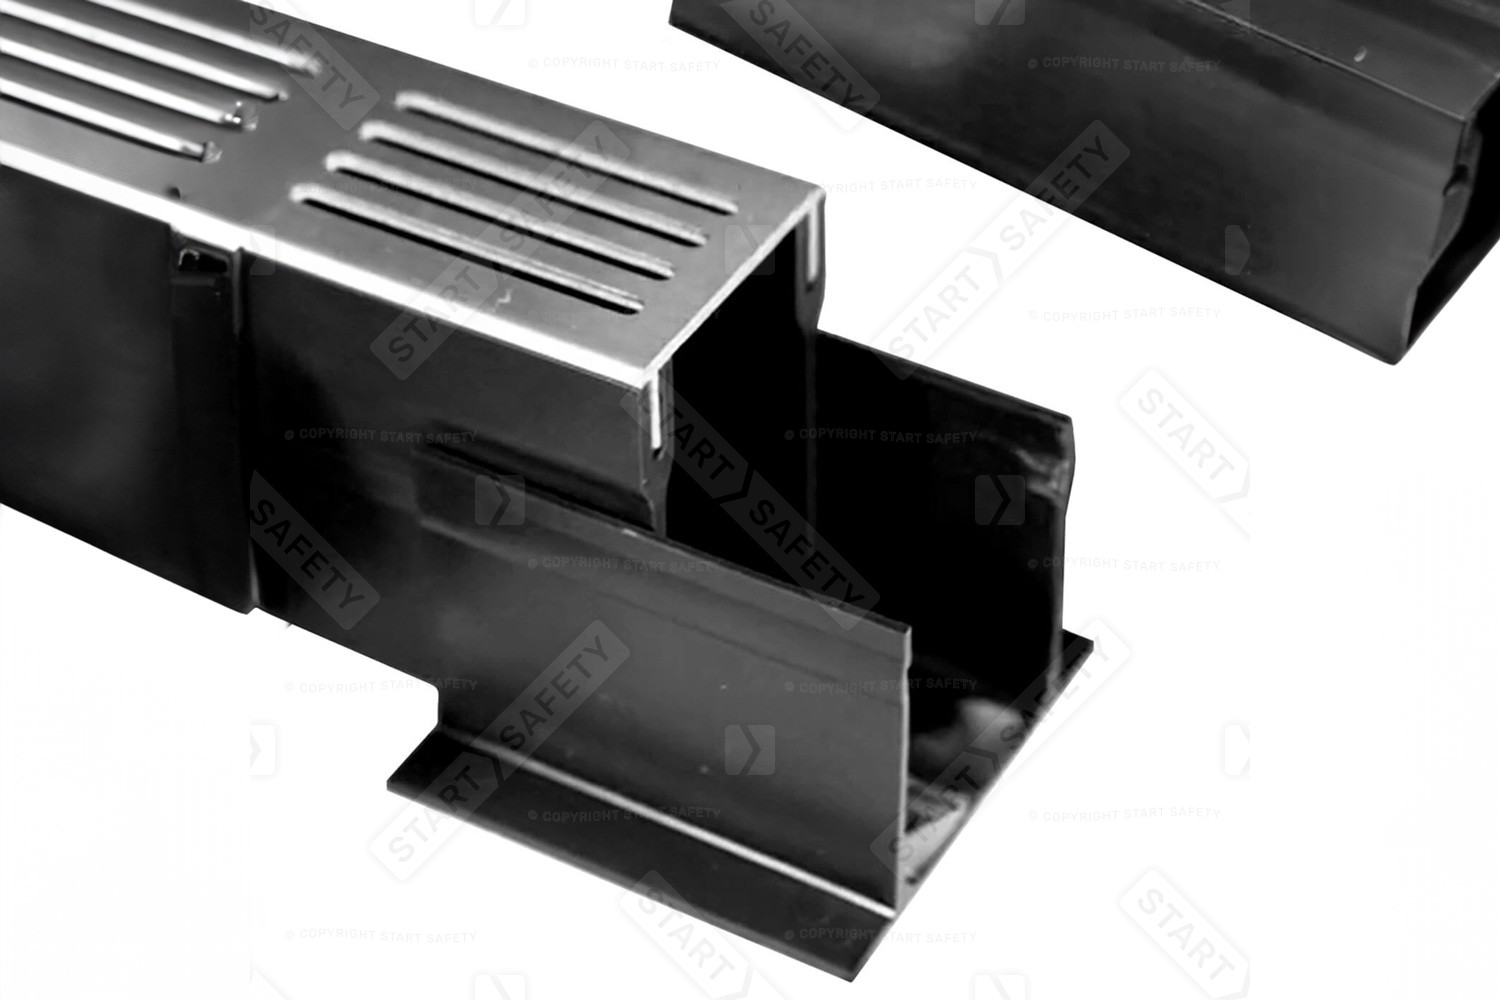 Alusthetic Threshold Drainage Channel Connector With Bottom Outlet